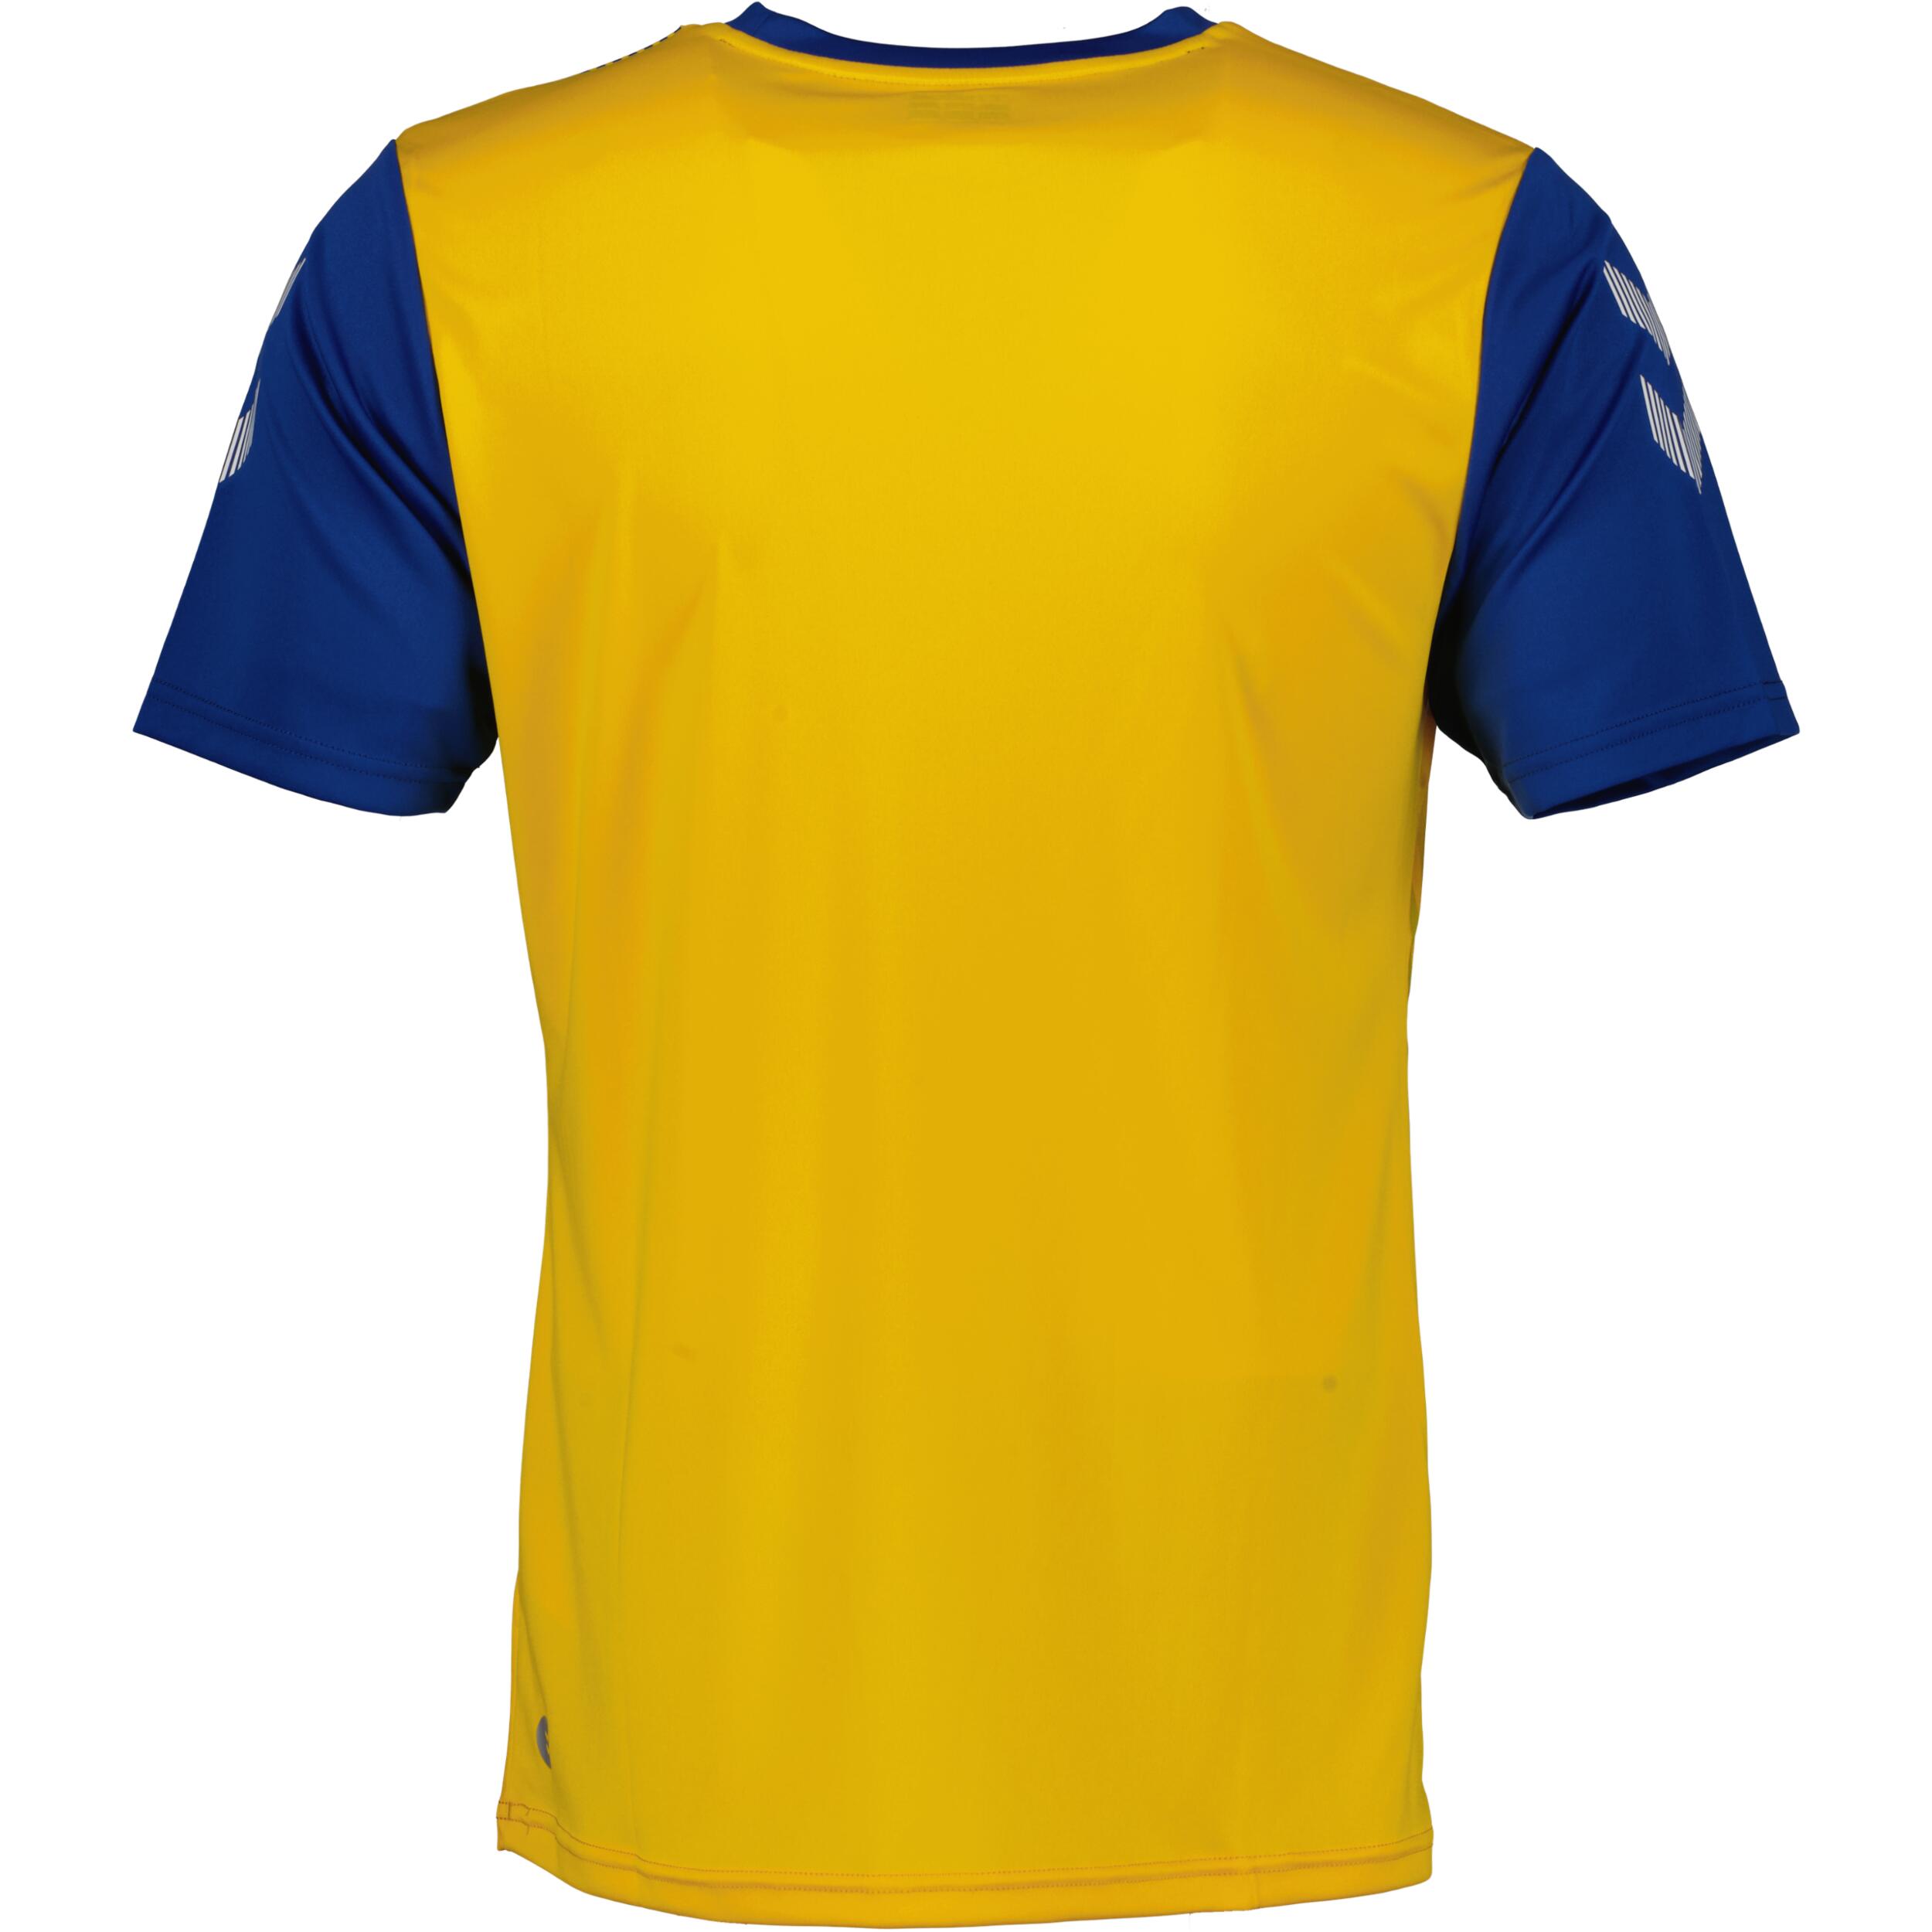 Mexico jersey for kids, great for football, in true blue/sports yellow 2/3